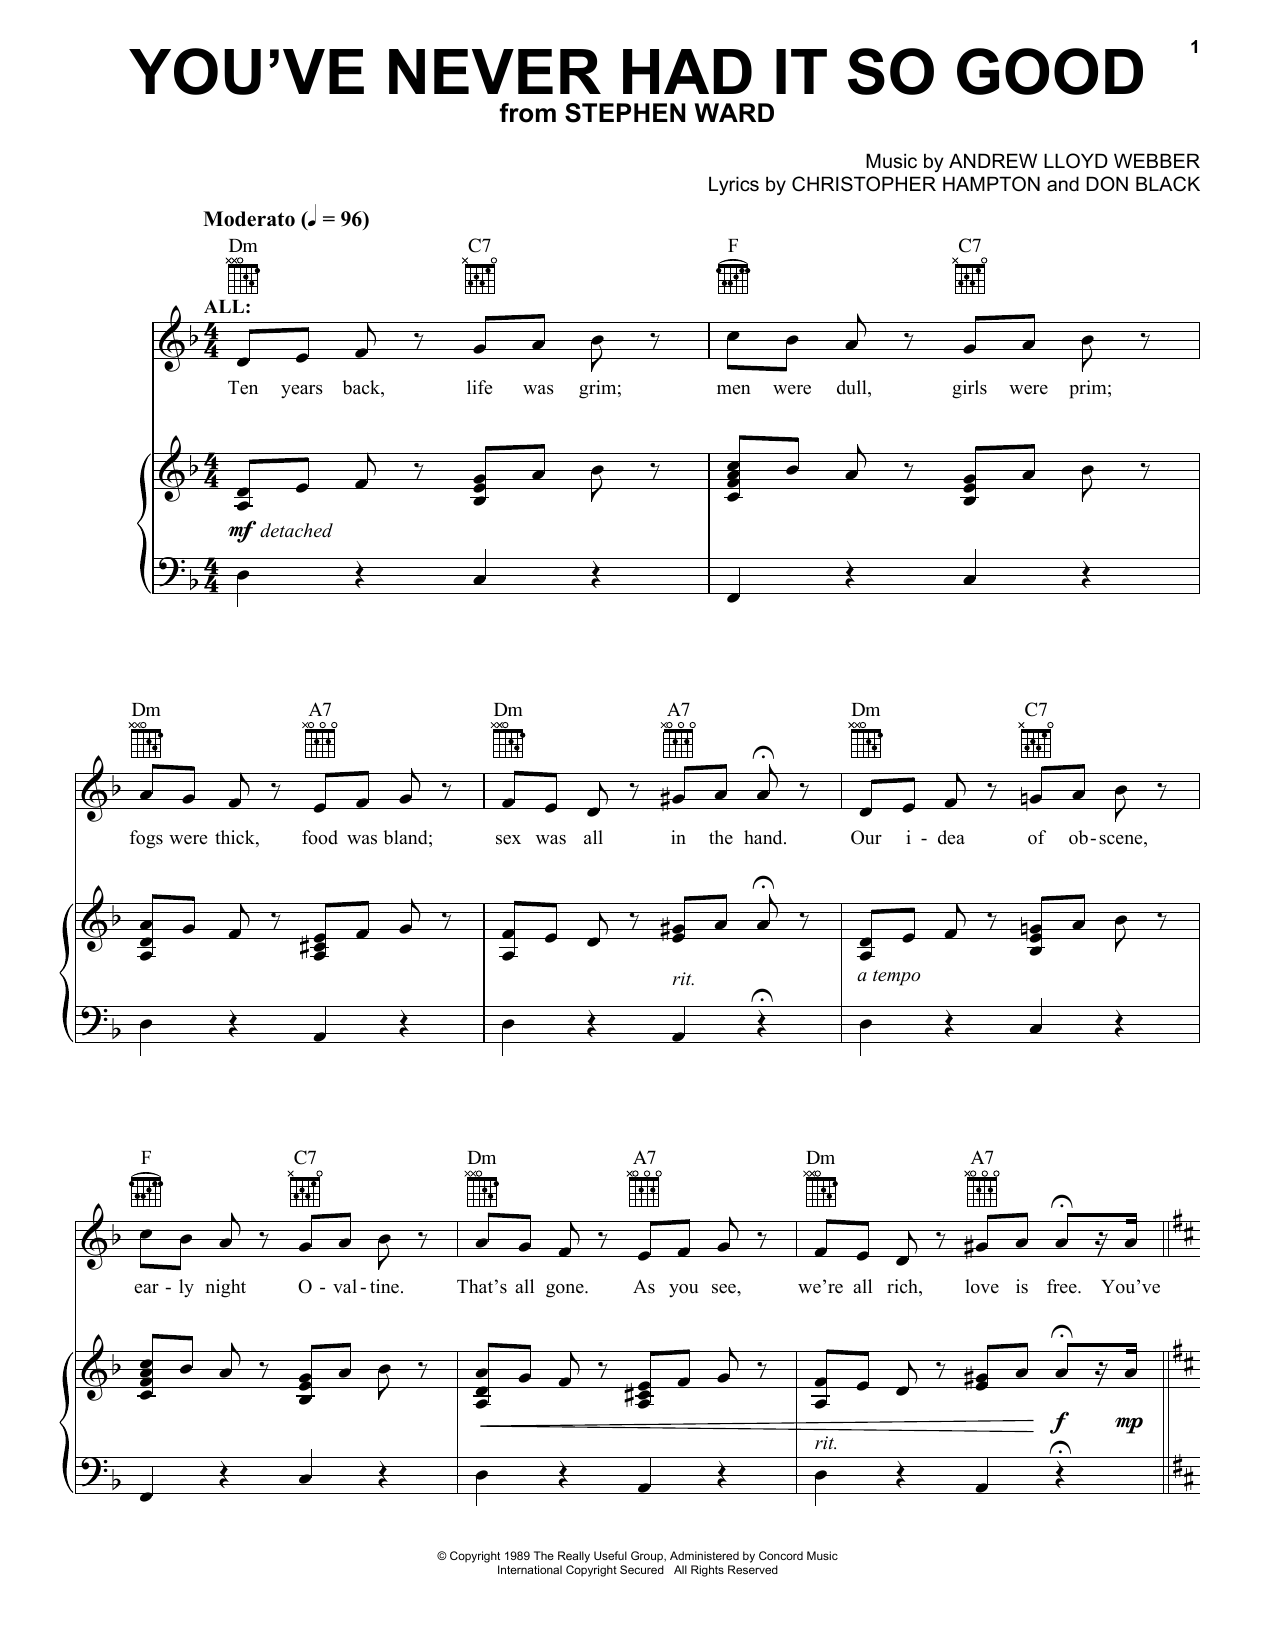 Download Andrew Lloyd Webber You've Never Had It So Good Sheet Music